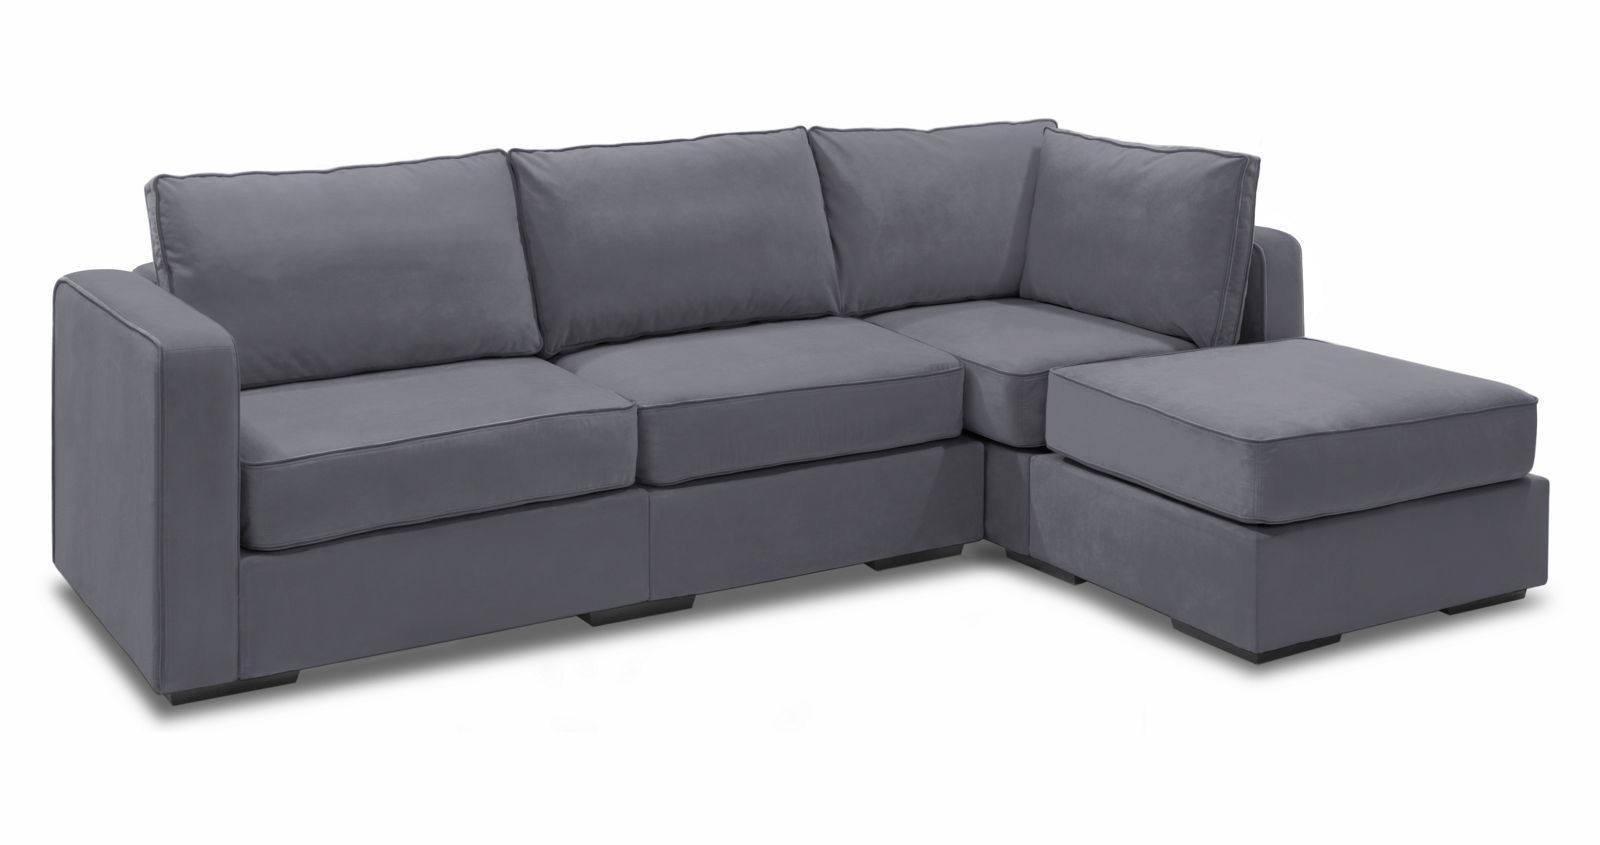 Chaise Sectional Couch | The Lovesac Company